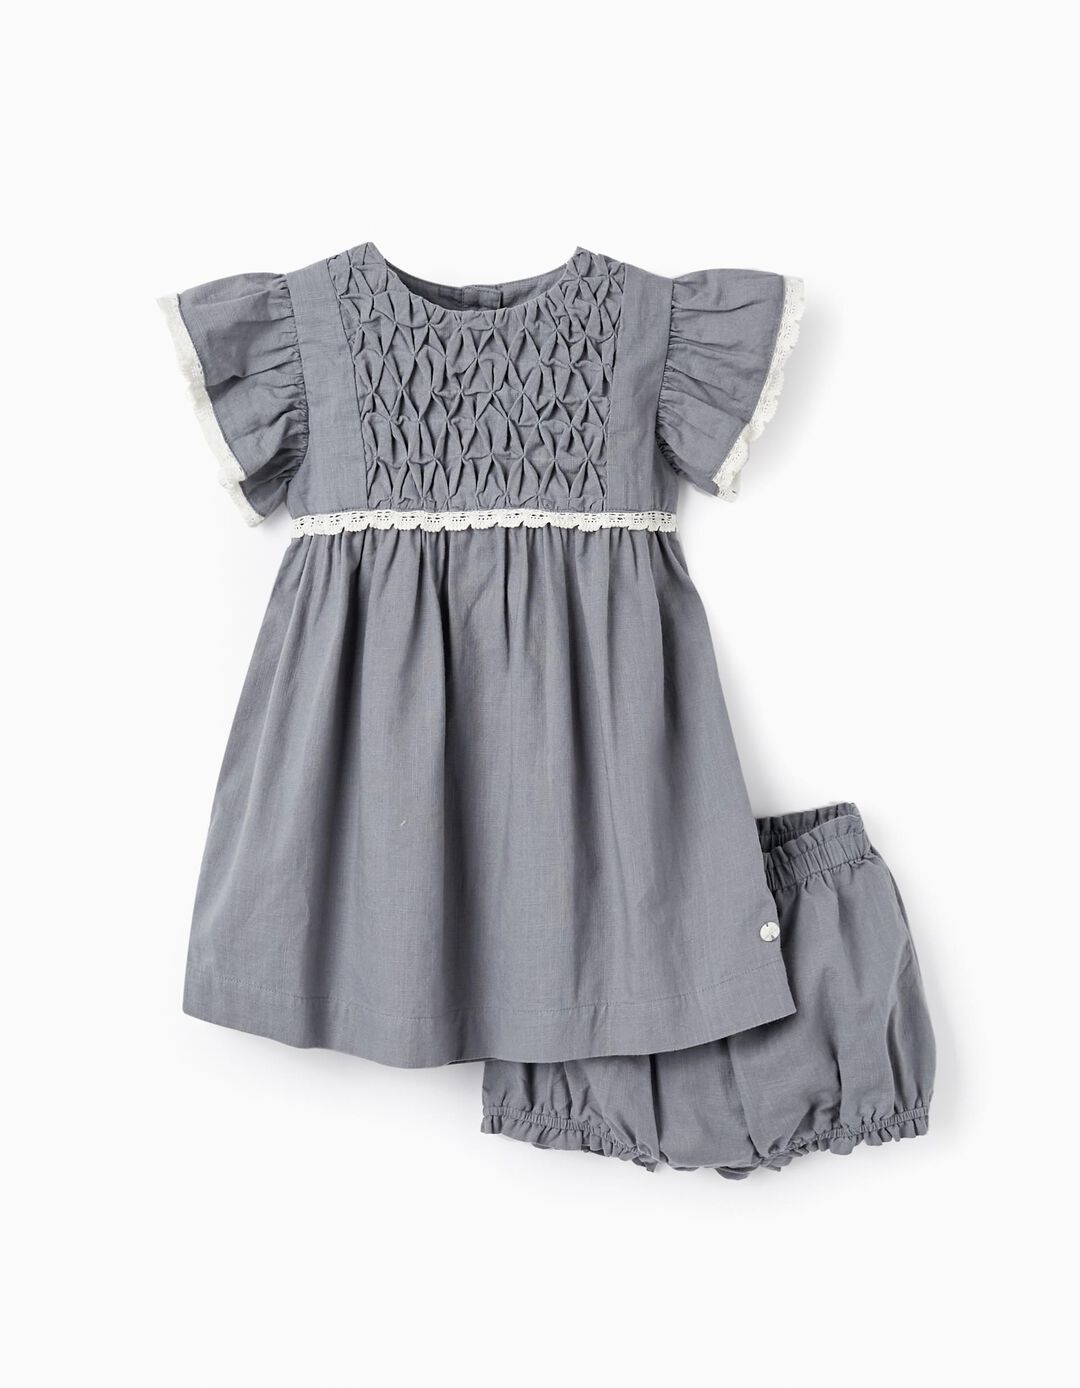 Cotton Dress with Lace + Diaper Cover for Baby Girls 'B&S', Grey